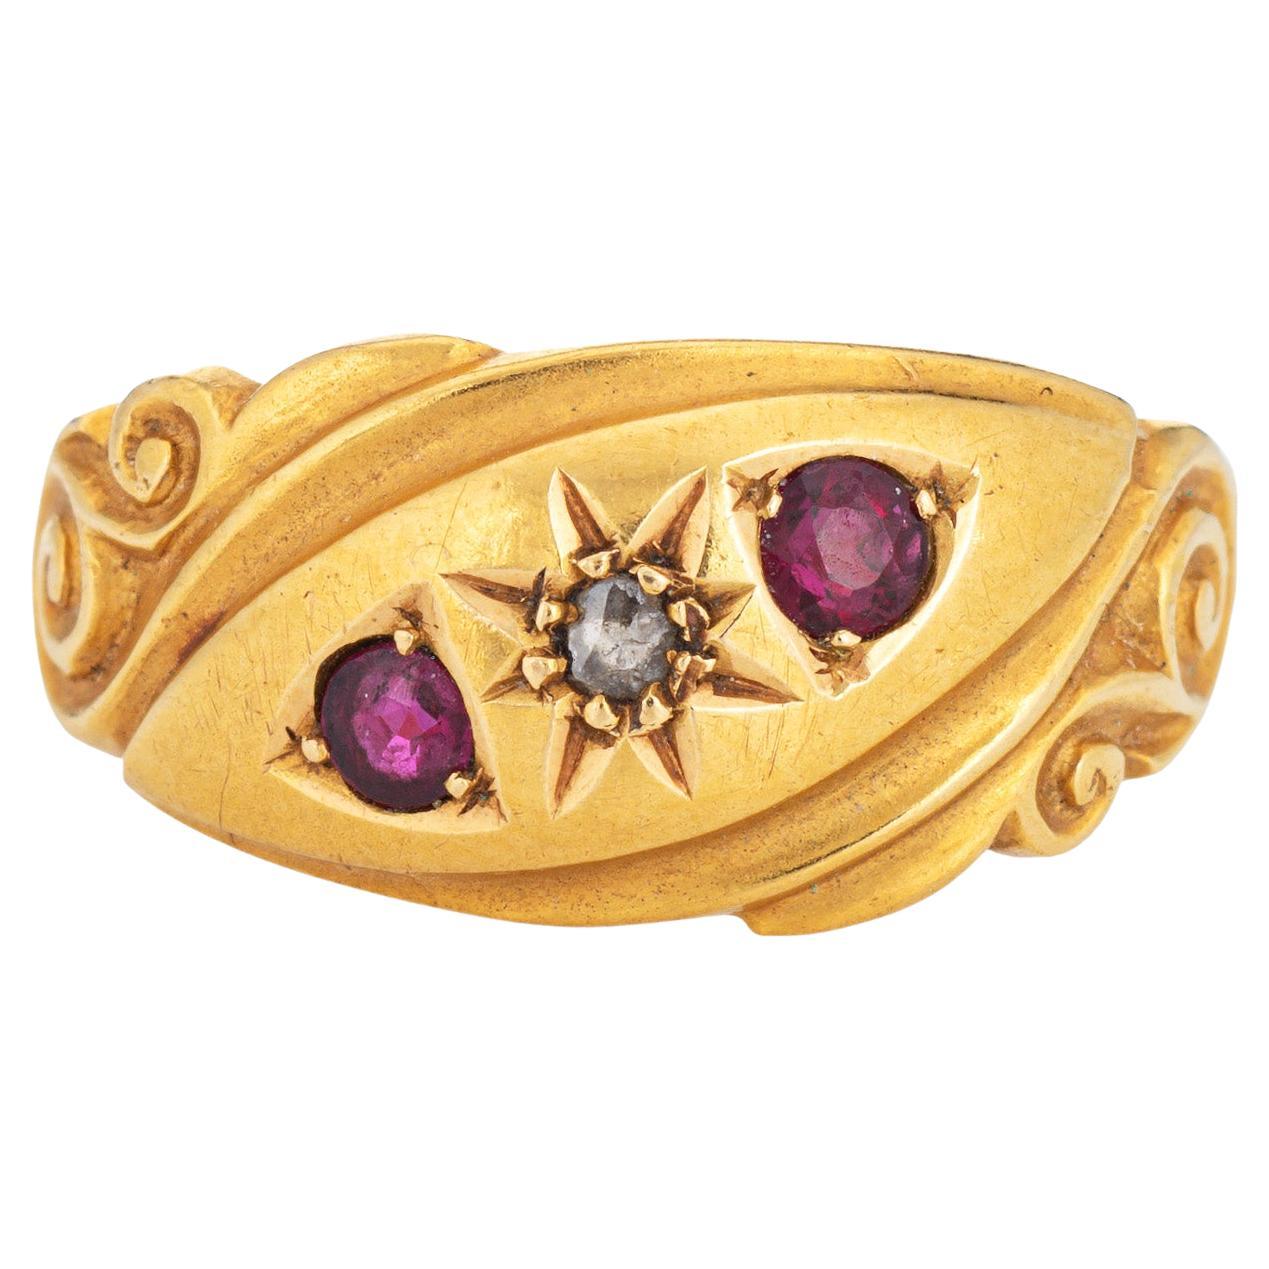 Antique Edwardian Band Diamond Ruby 18k Yellow Gold Chester Ring